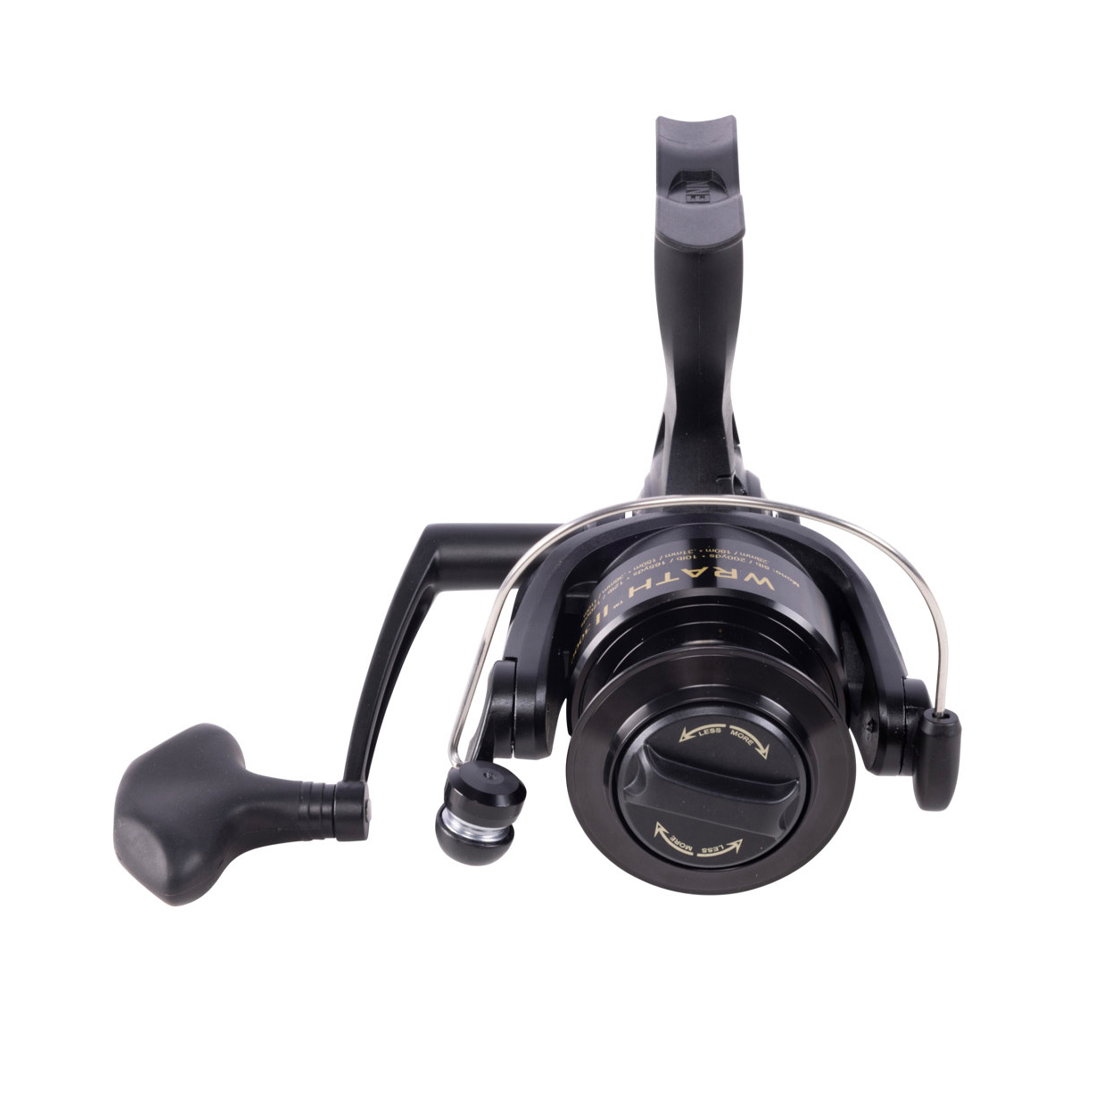 PENN Wrath II Spinning Reel & Combo Now Features the Classic PENN Cosmetics  – Anglers Channel